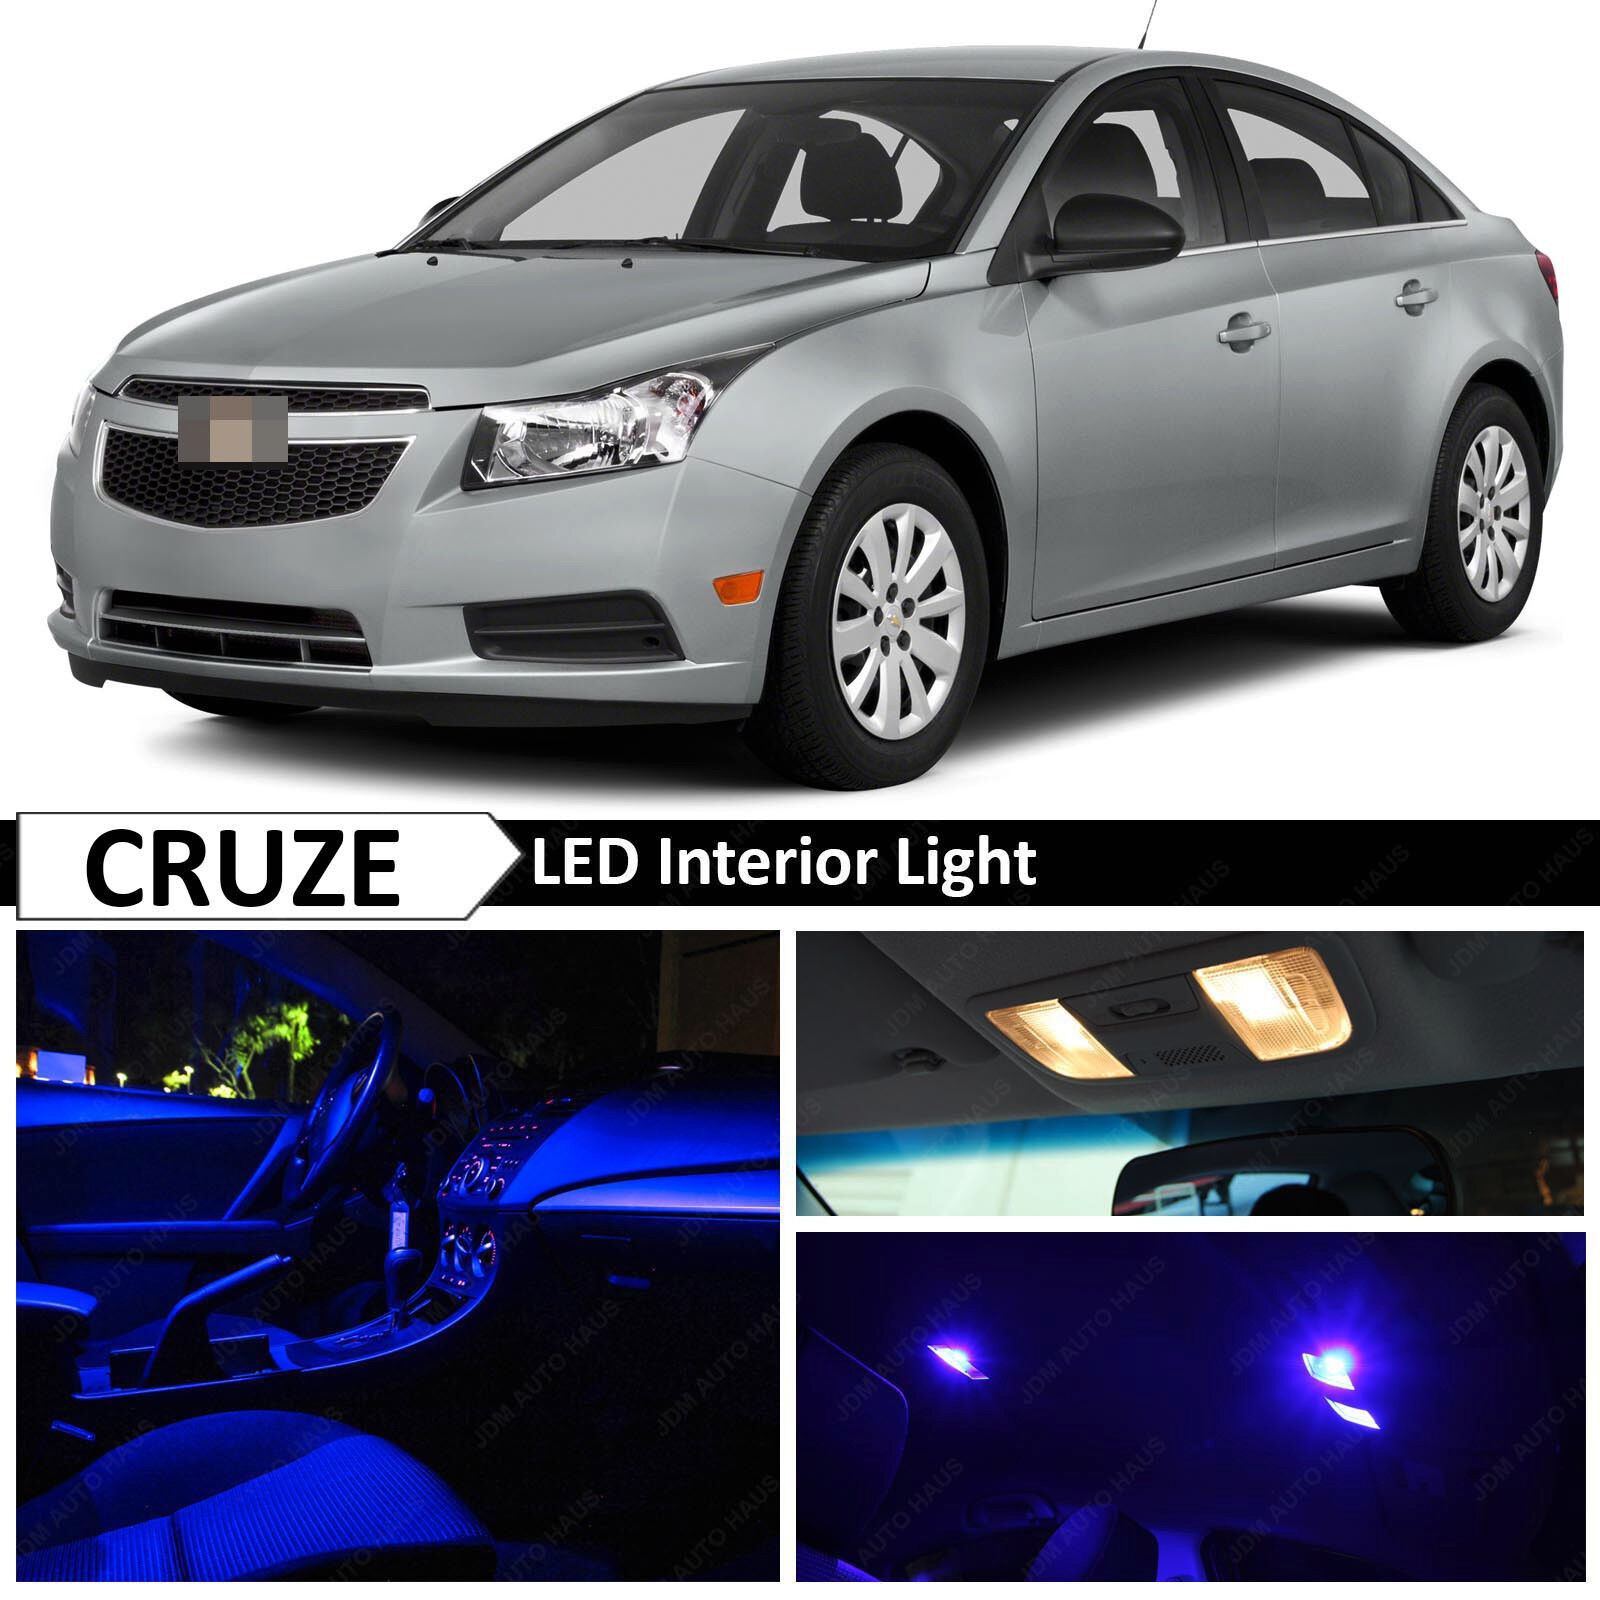 12x Blue LED Lights Interior Package Kit for 2011-2017 Chevy Cruze